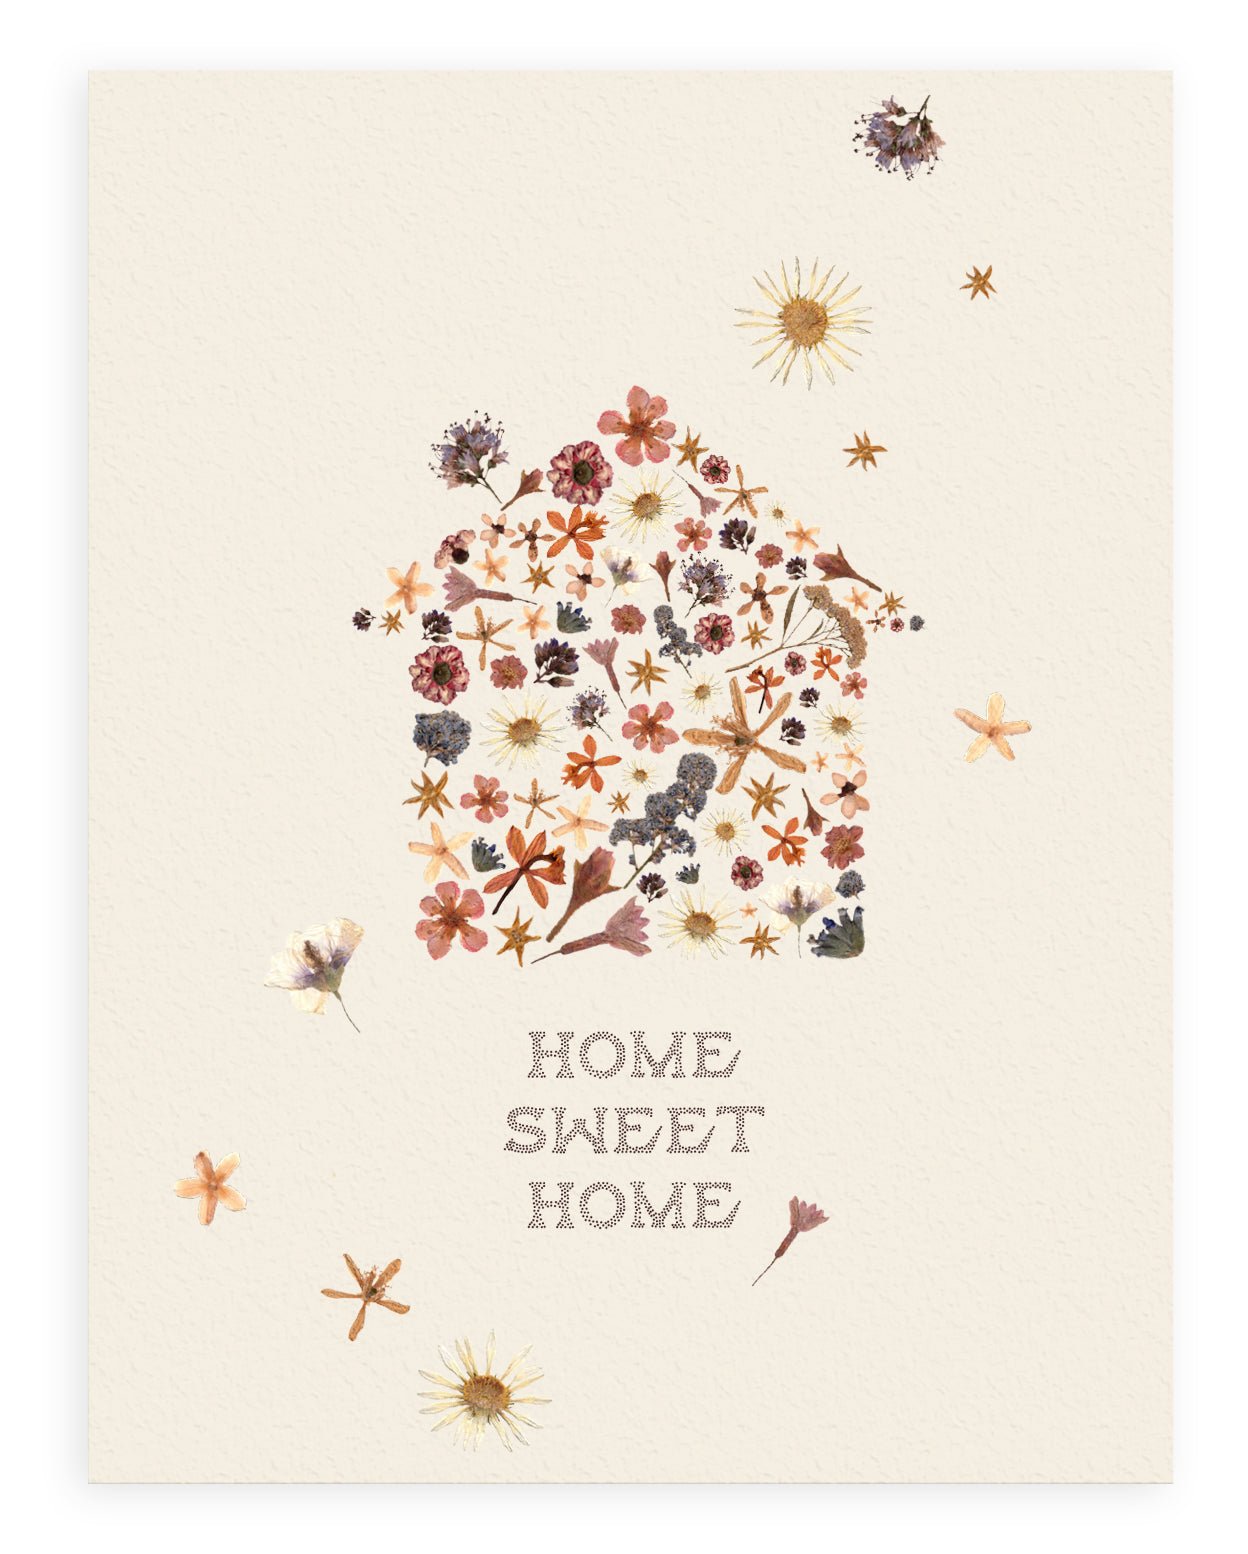 Cream colored background with pressed flowers scattered across dried flora constructed in the shape of a house with the words "Home Sweet Home" printed below. Shown with white background.